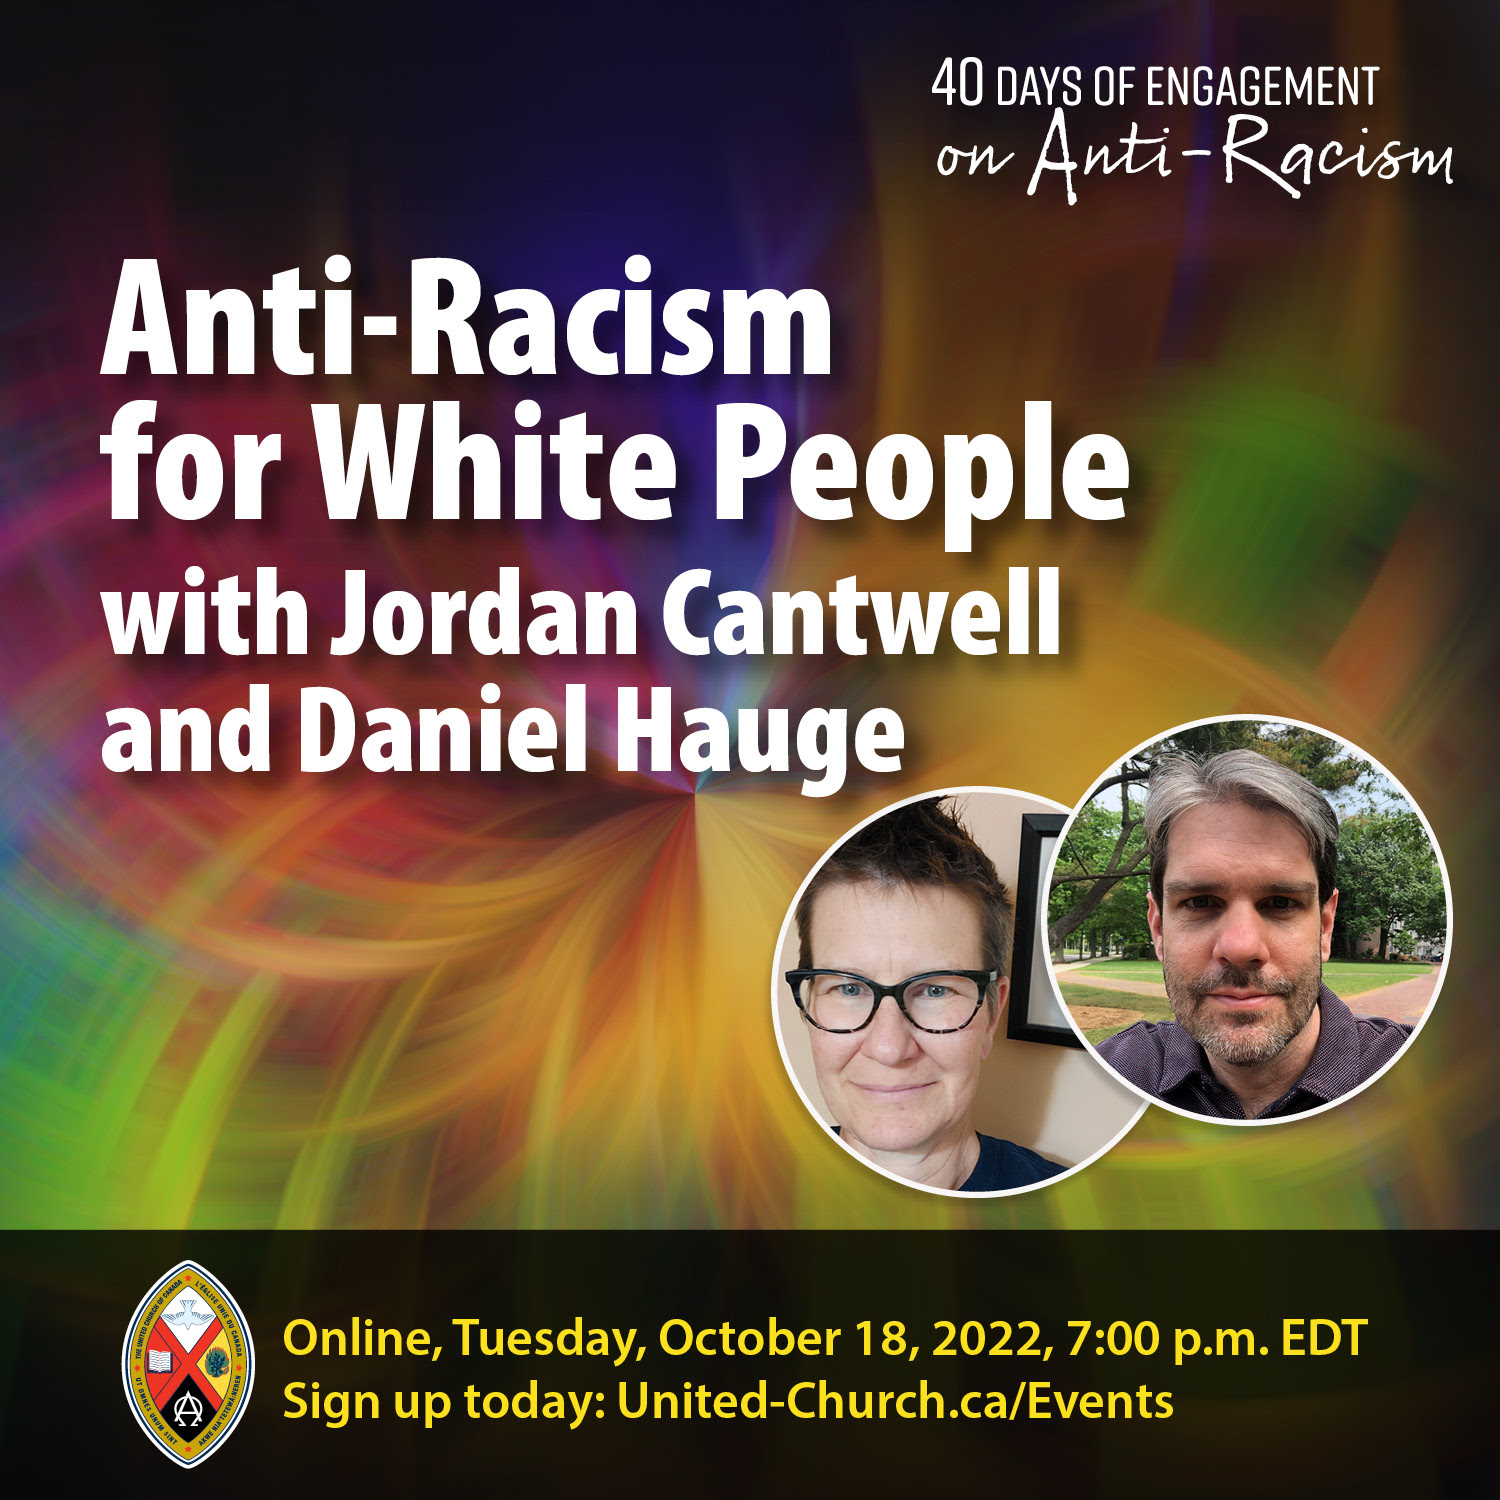 Live Event: Anti-Racism for White People